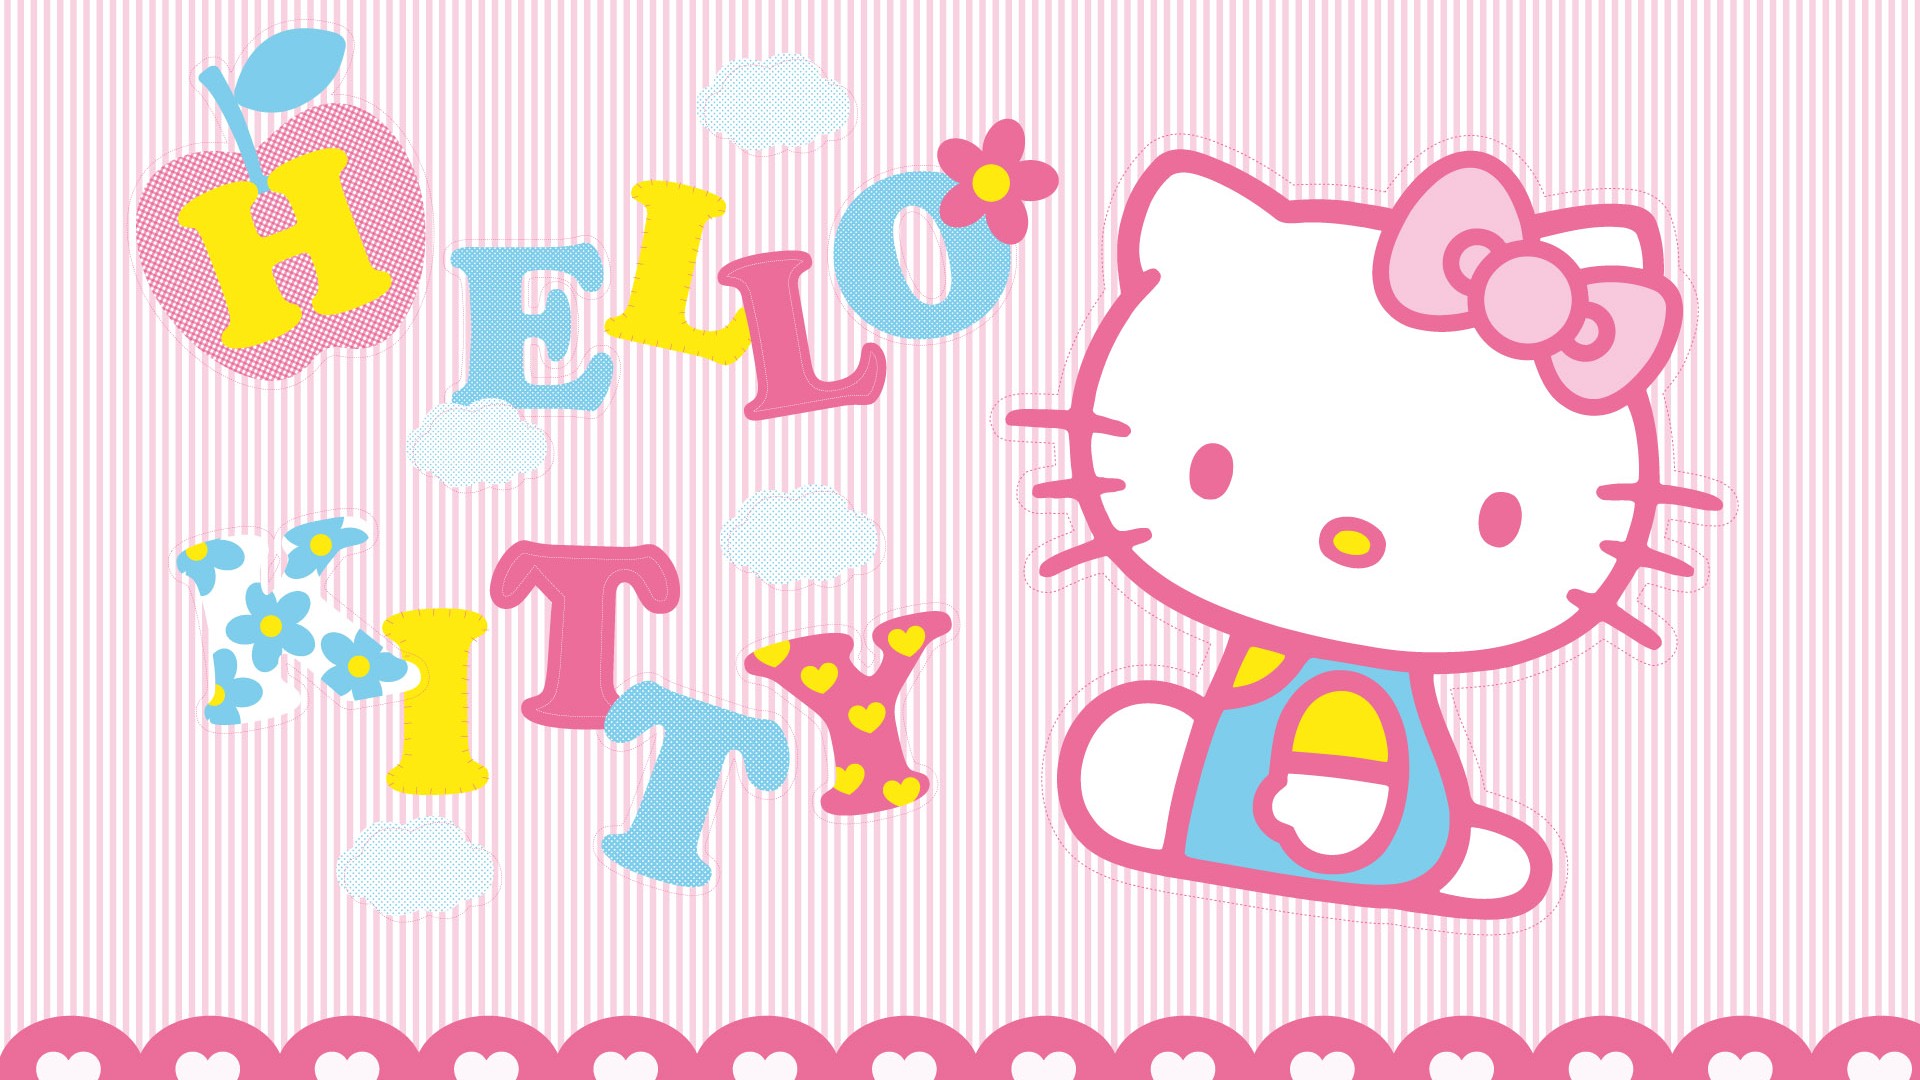 Hello Kitty Characters Desktop Backgrounds with image resolution 1920x1080 pixel. You can make this wallpaper for your Desktop Computer Backgrounds, Mac Wallpapers, Android Lock screen or iPhone Screensavers